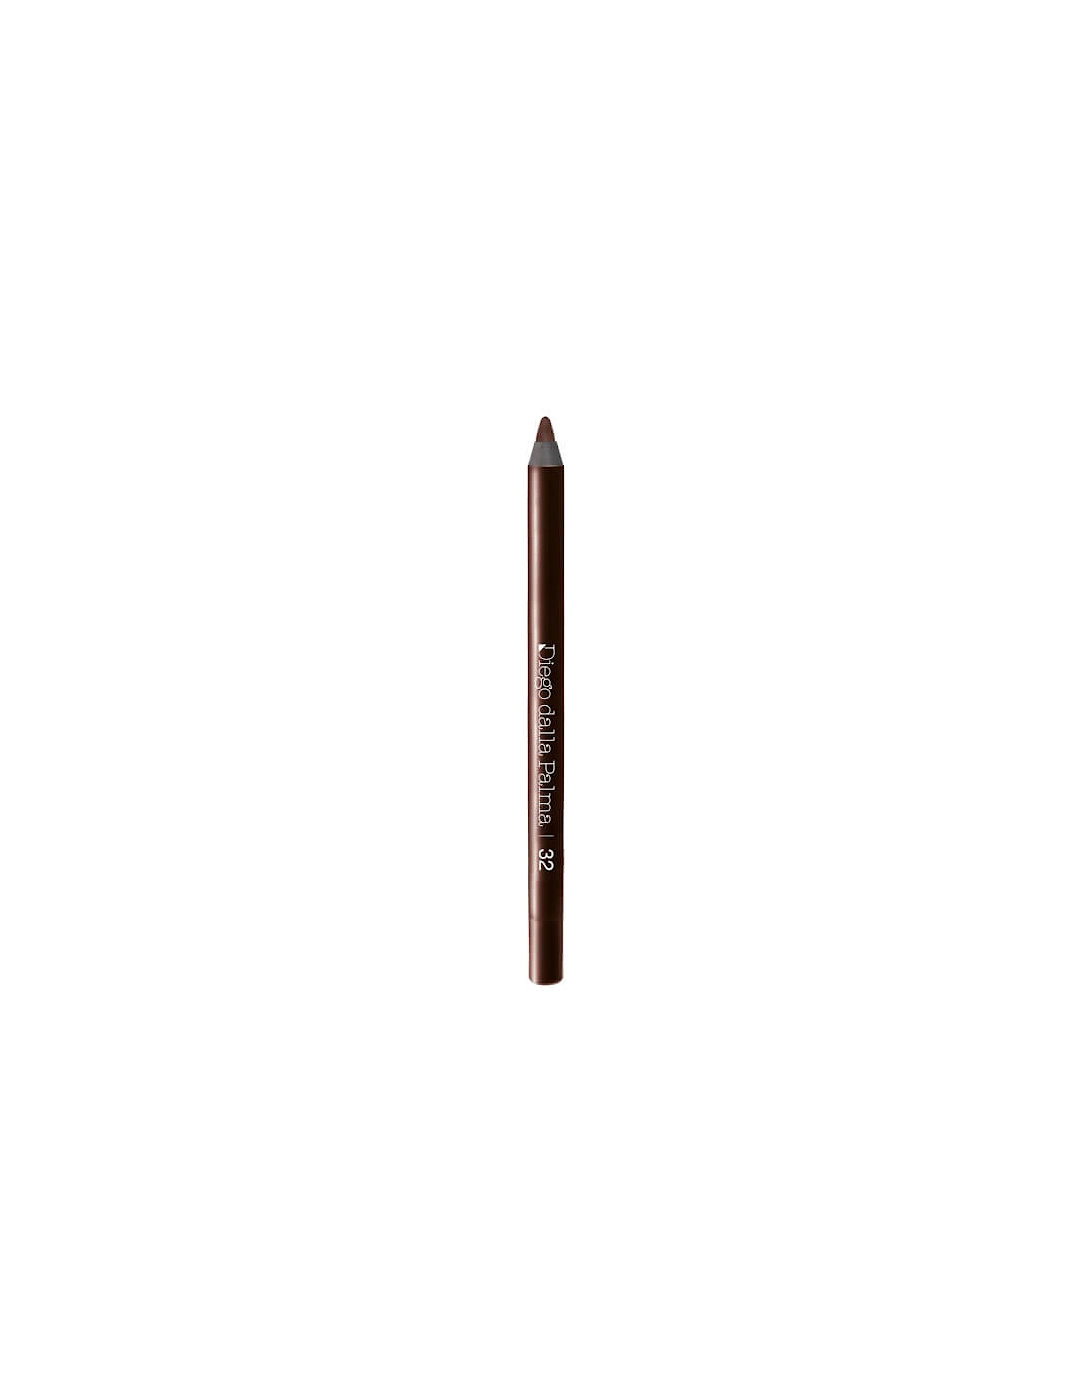 Stay On Me Eye Liner - 32 Brown - Diego Dalla Palma, 2 of 1